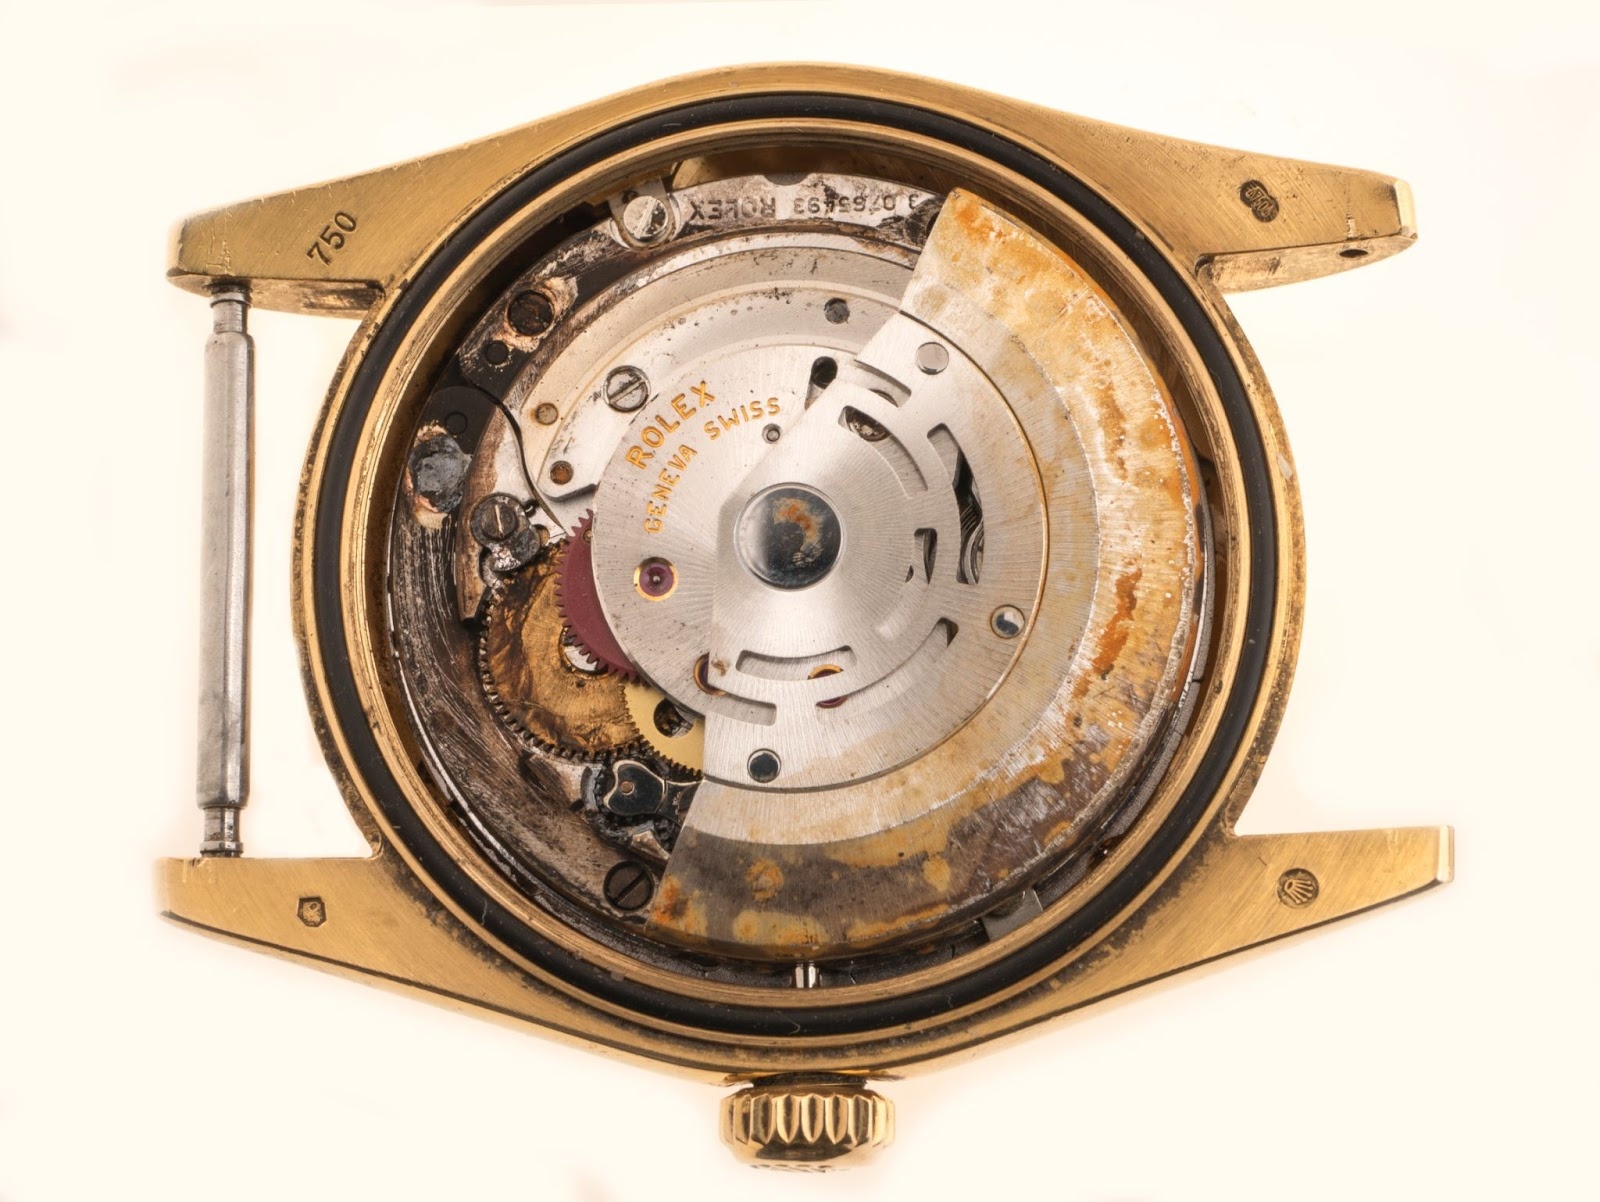 Repairing Rust and Water Damage in Your Luxury Watch